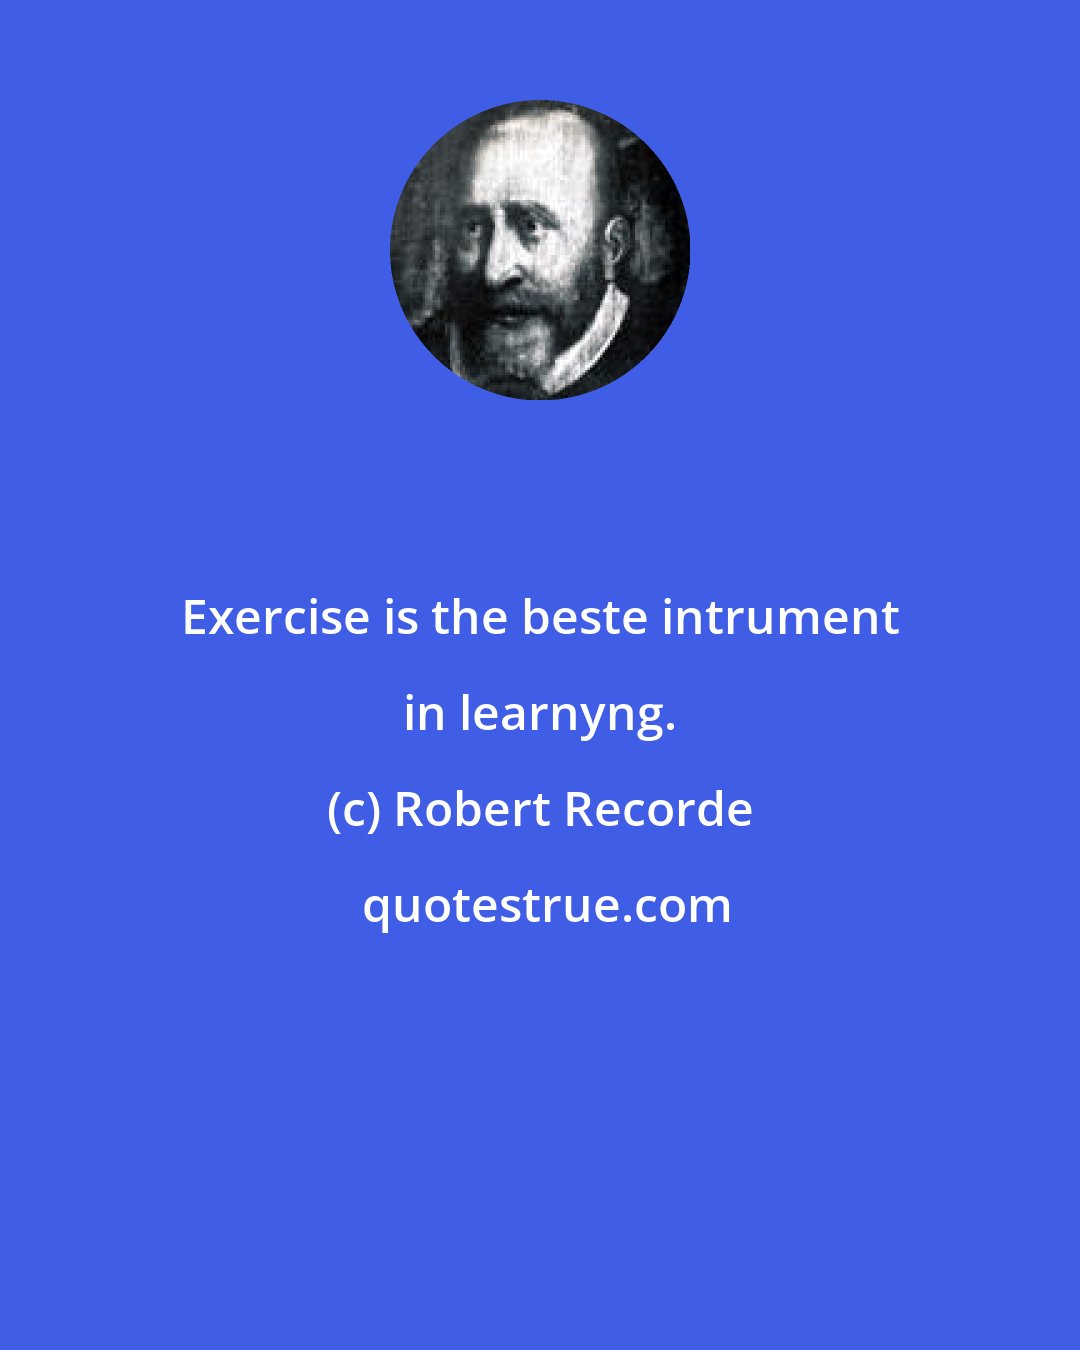 Robert Recorde: Exercise is the beste intrument in learnyng.